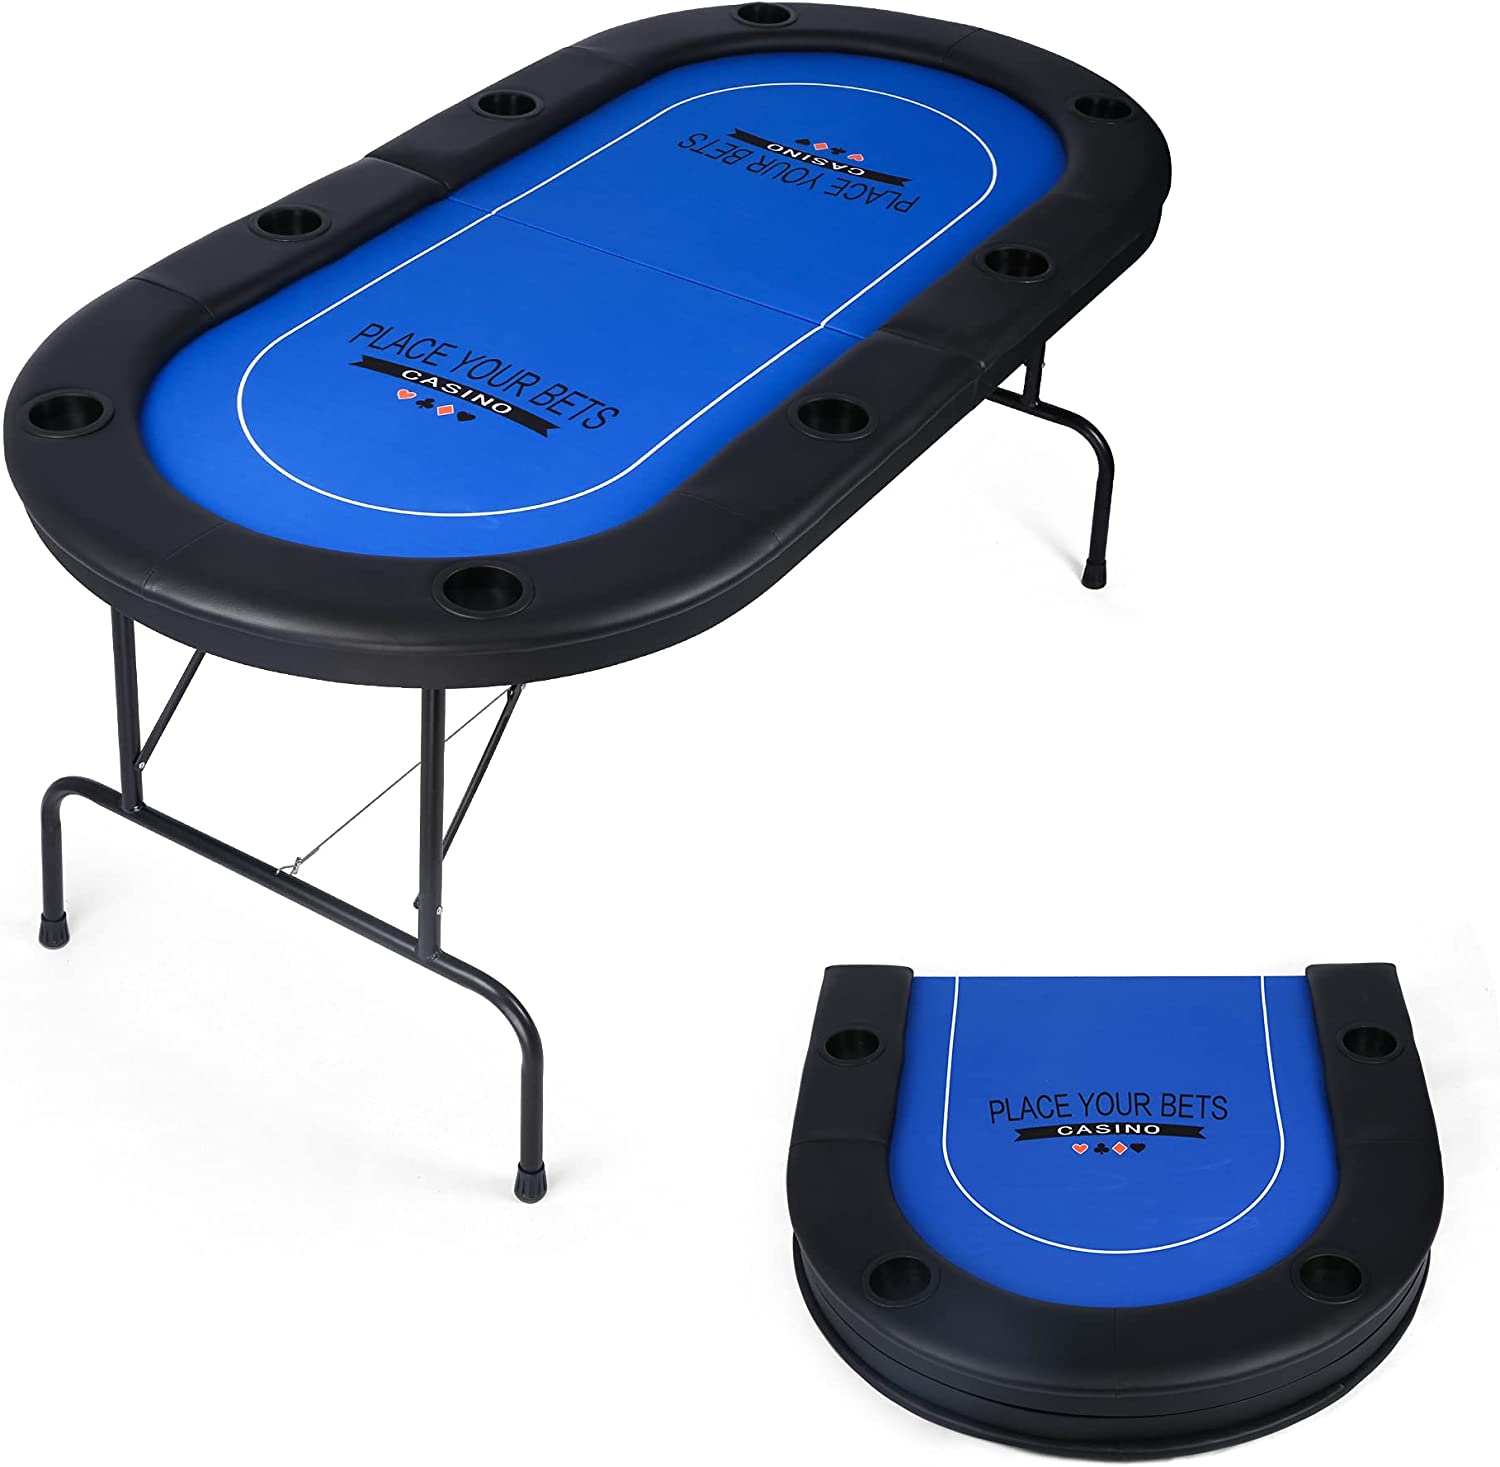 Foldable 6-8 Players Poker Table Texas Holdem Poker Casino Games w/ Faux Leather Padded Rails and Cup Holders, Blue